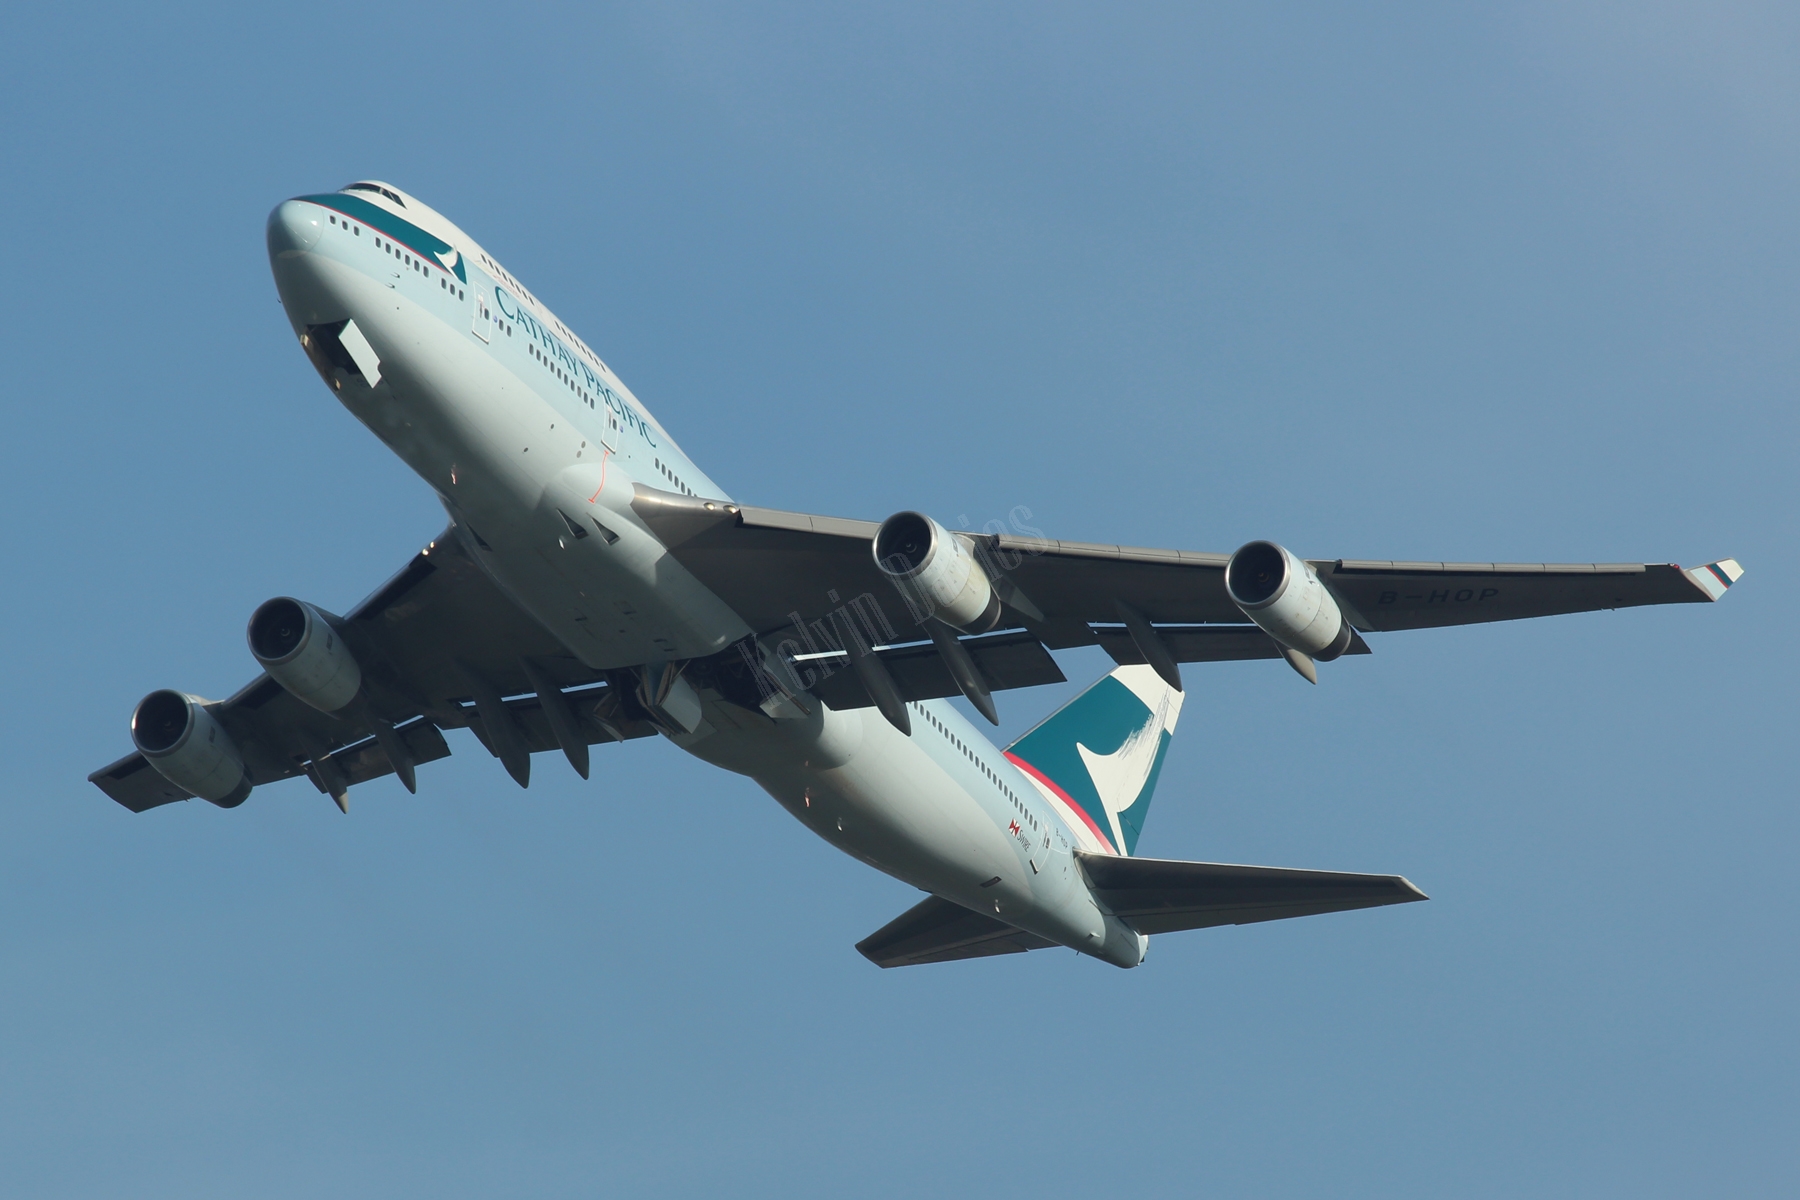 Cathay Pacific Airways 747 B-HOP